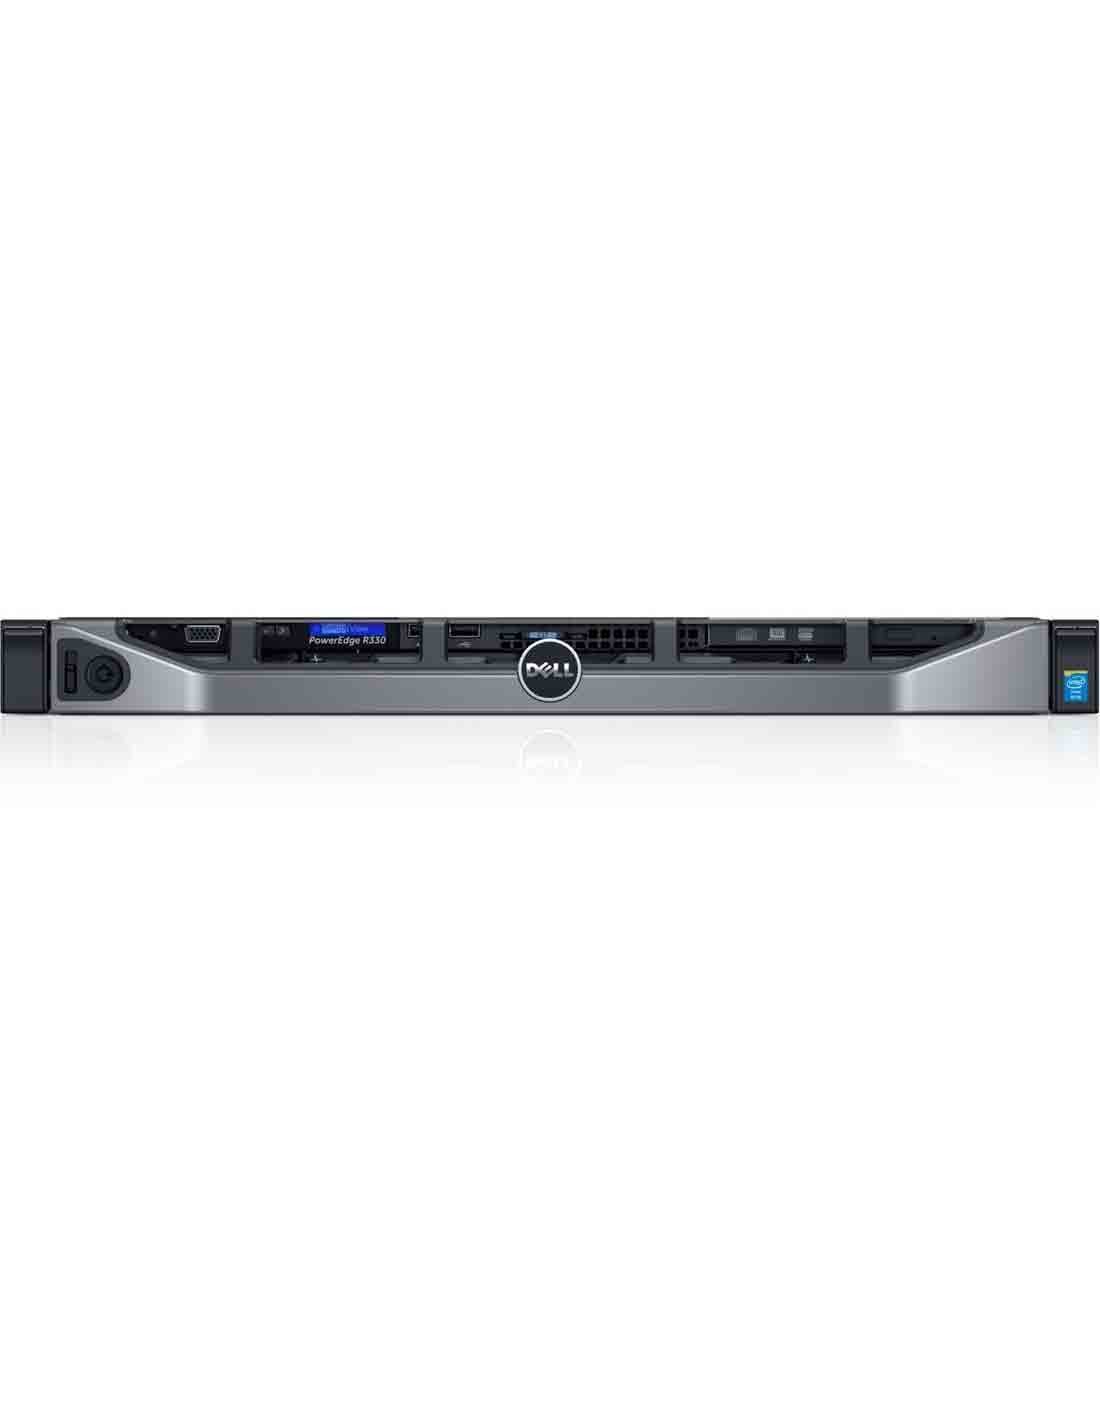 Dell PowerEdge R330 E3-1220v5 Rack Server at a Cheap Price in the Middle East